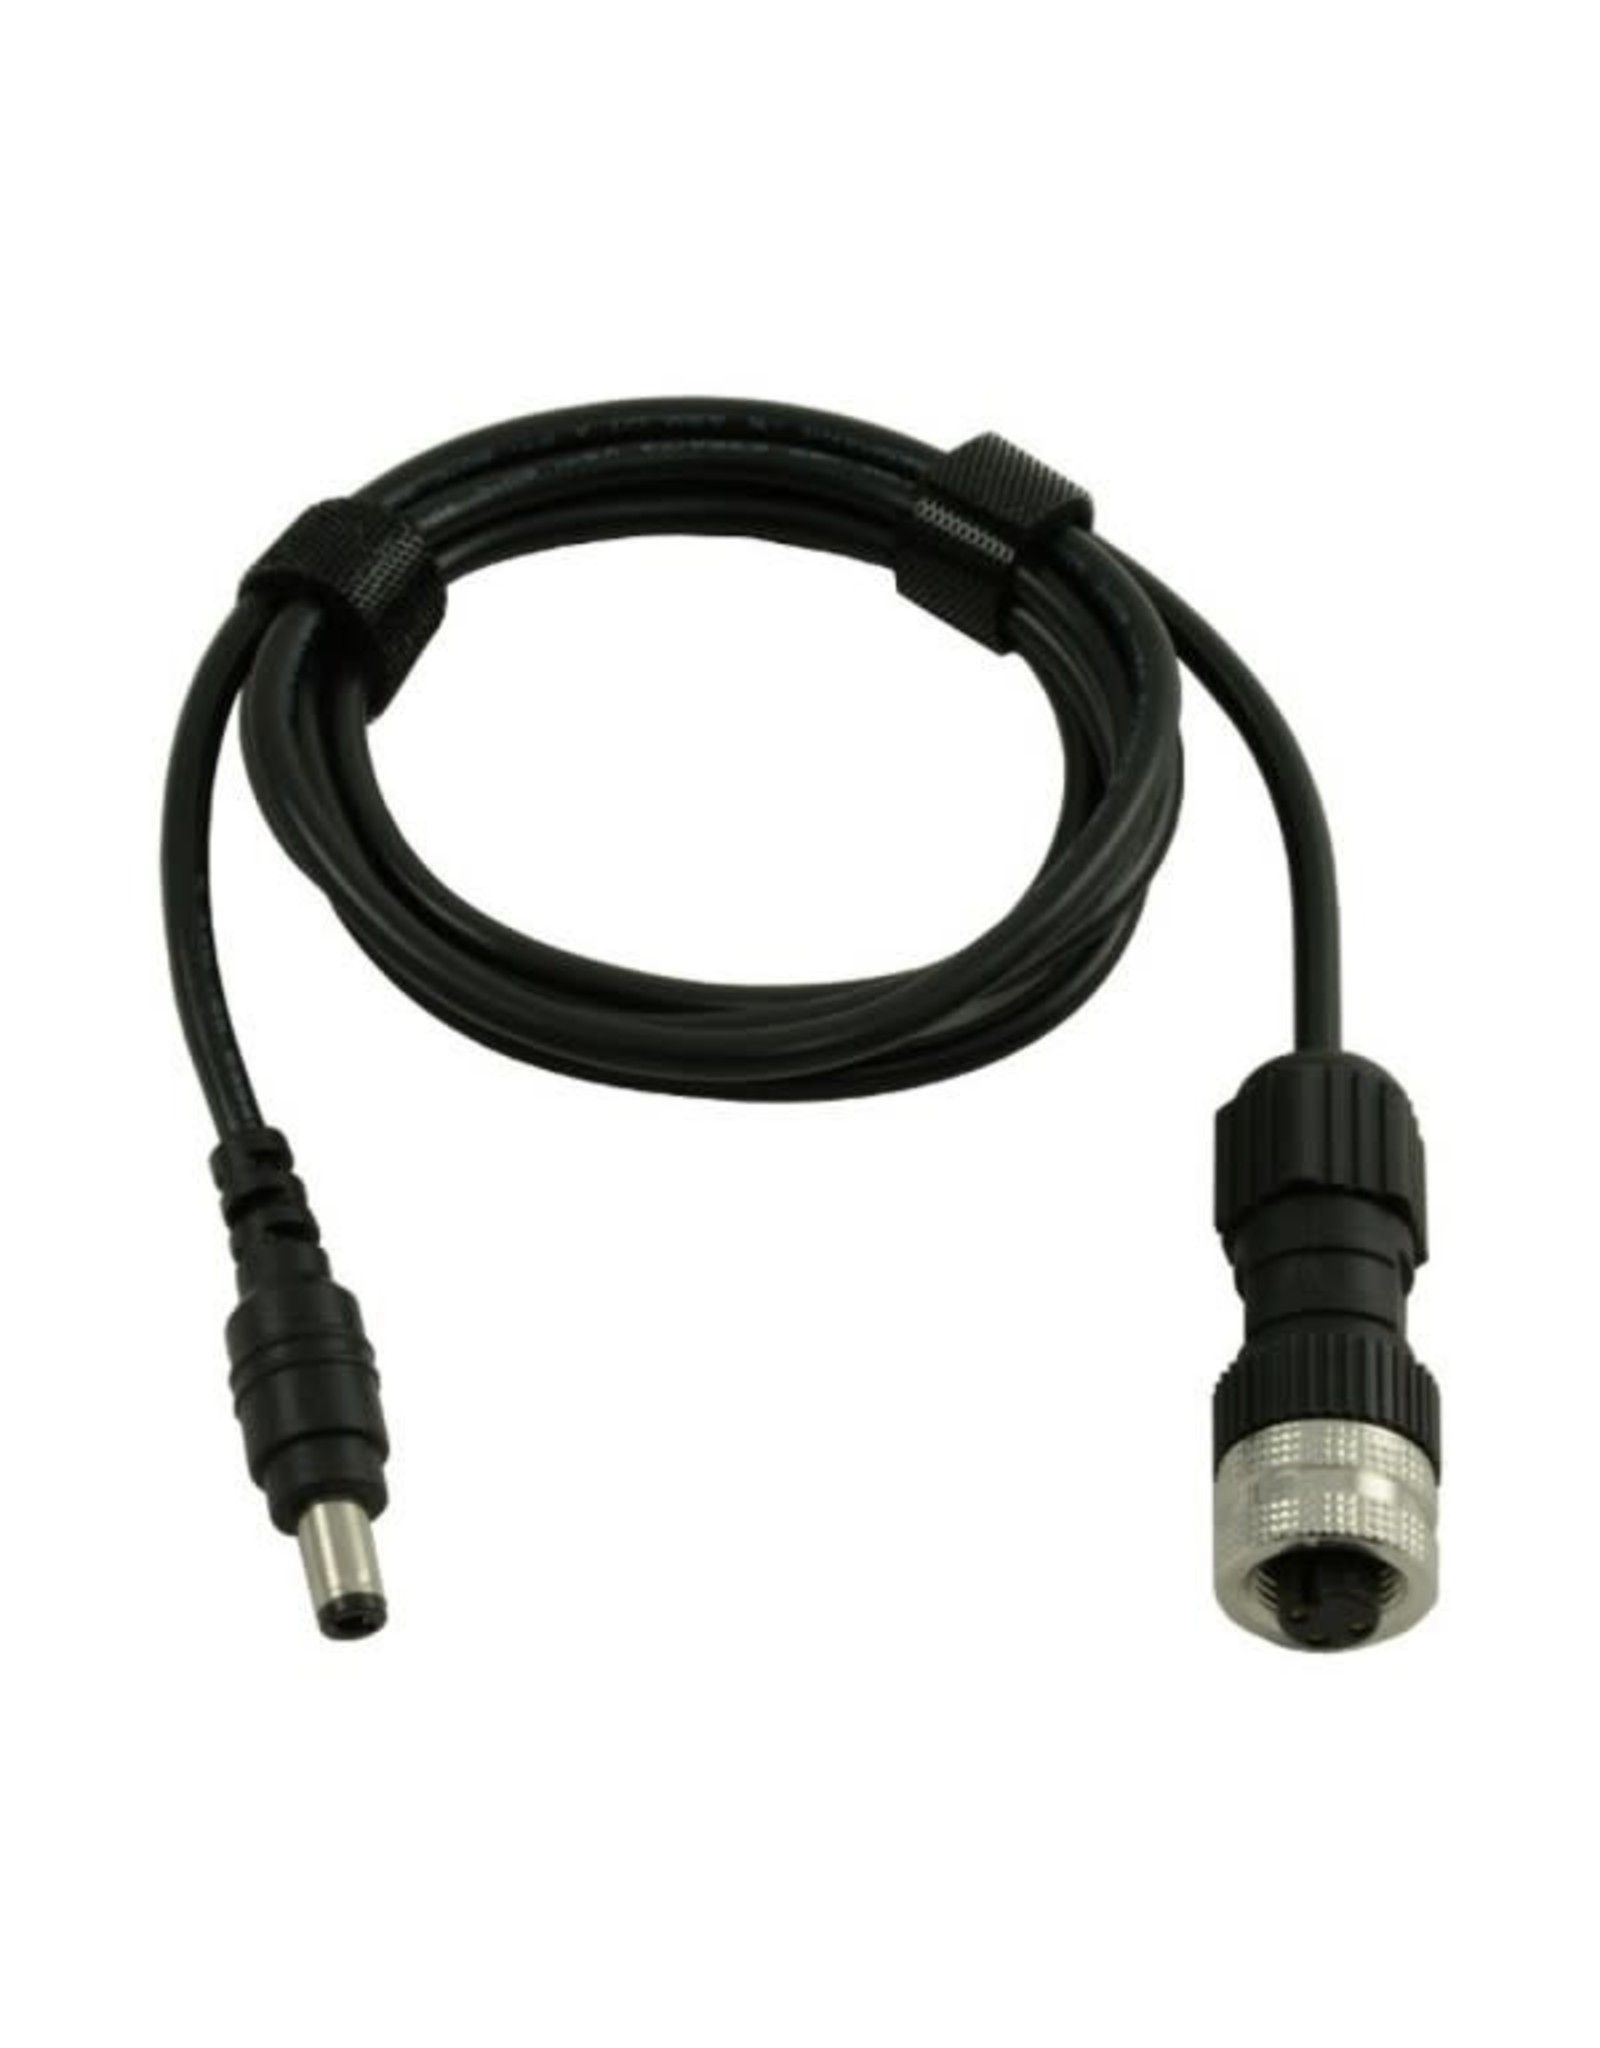 PrimaLuceLab Primaluce Eagle-compatible power cable with 5.5 - 2.5 connector - 115cm for 8A port